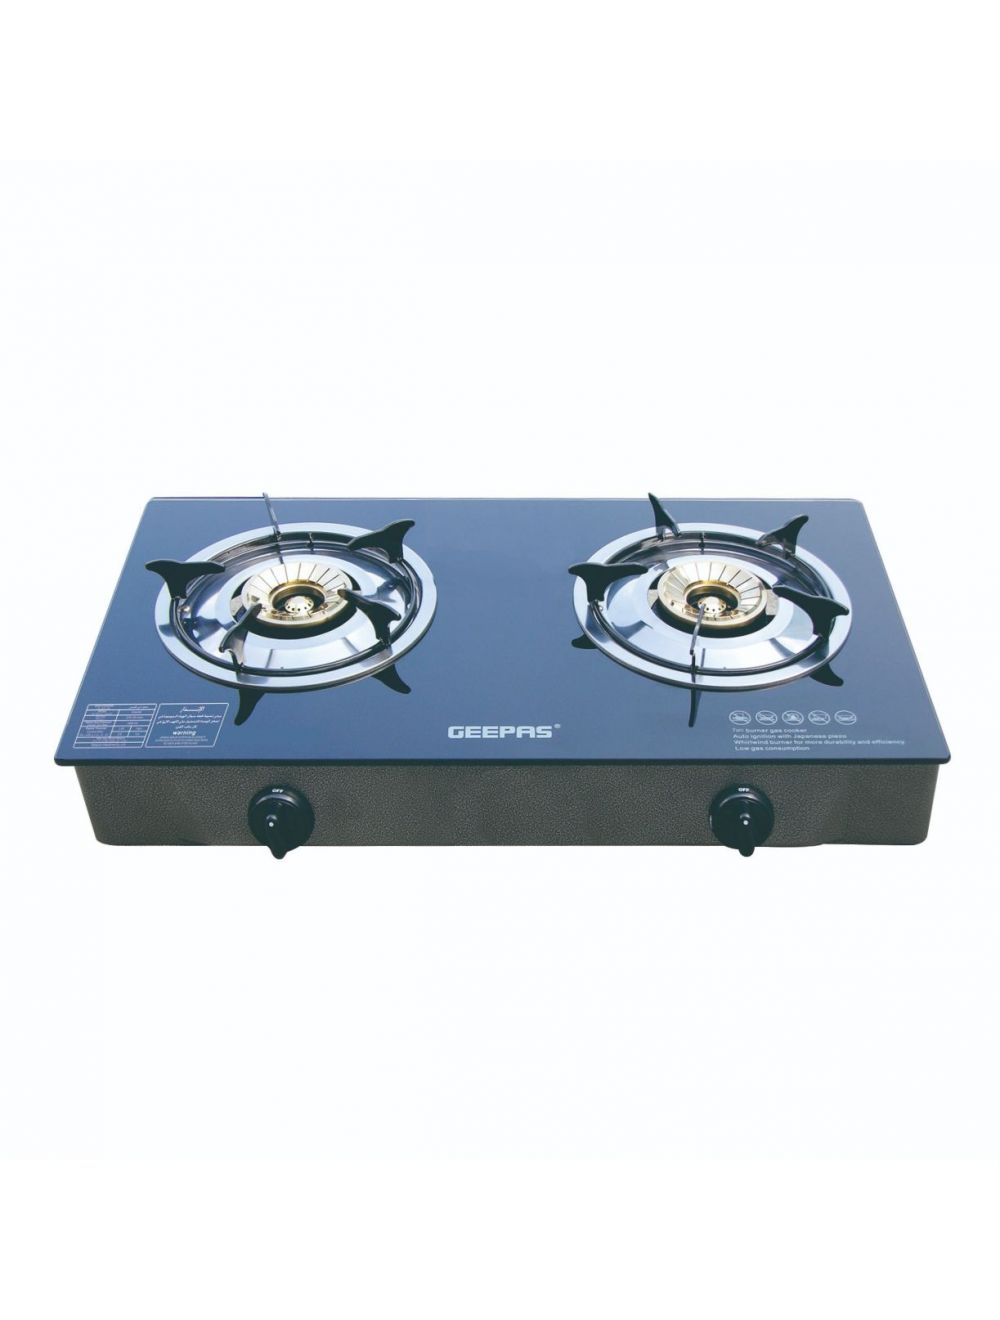 Geepas Two Gas Burner Auto Ignition Gas Stove